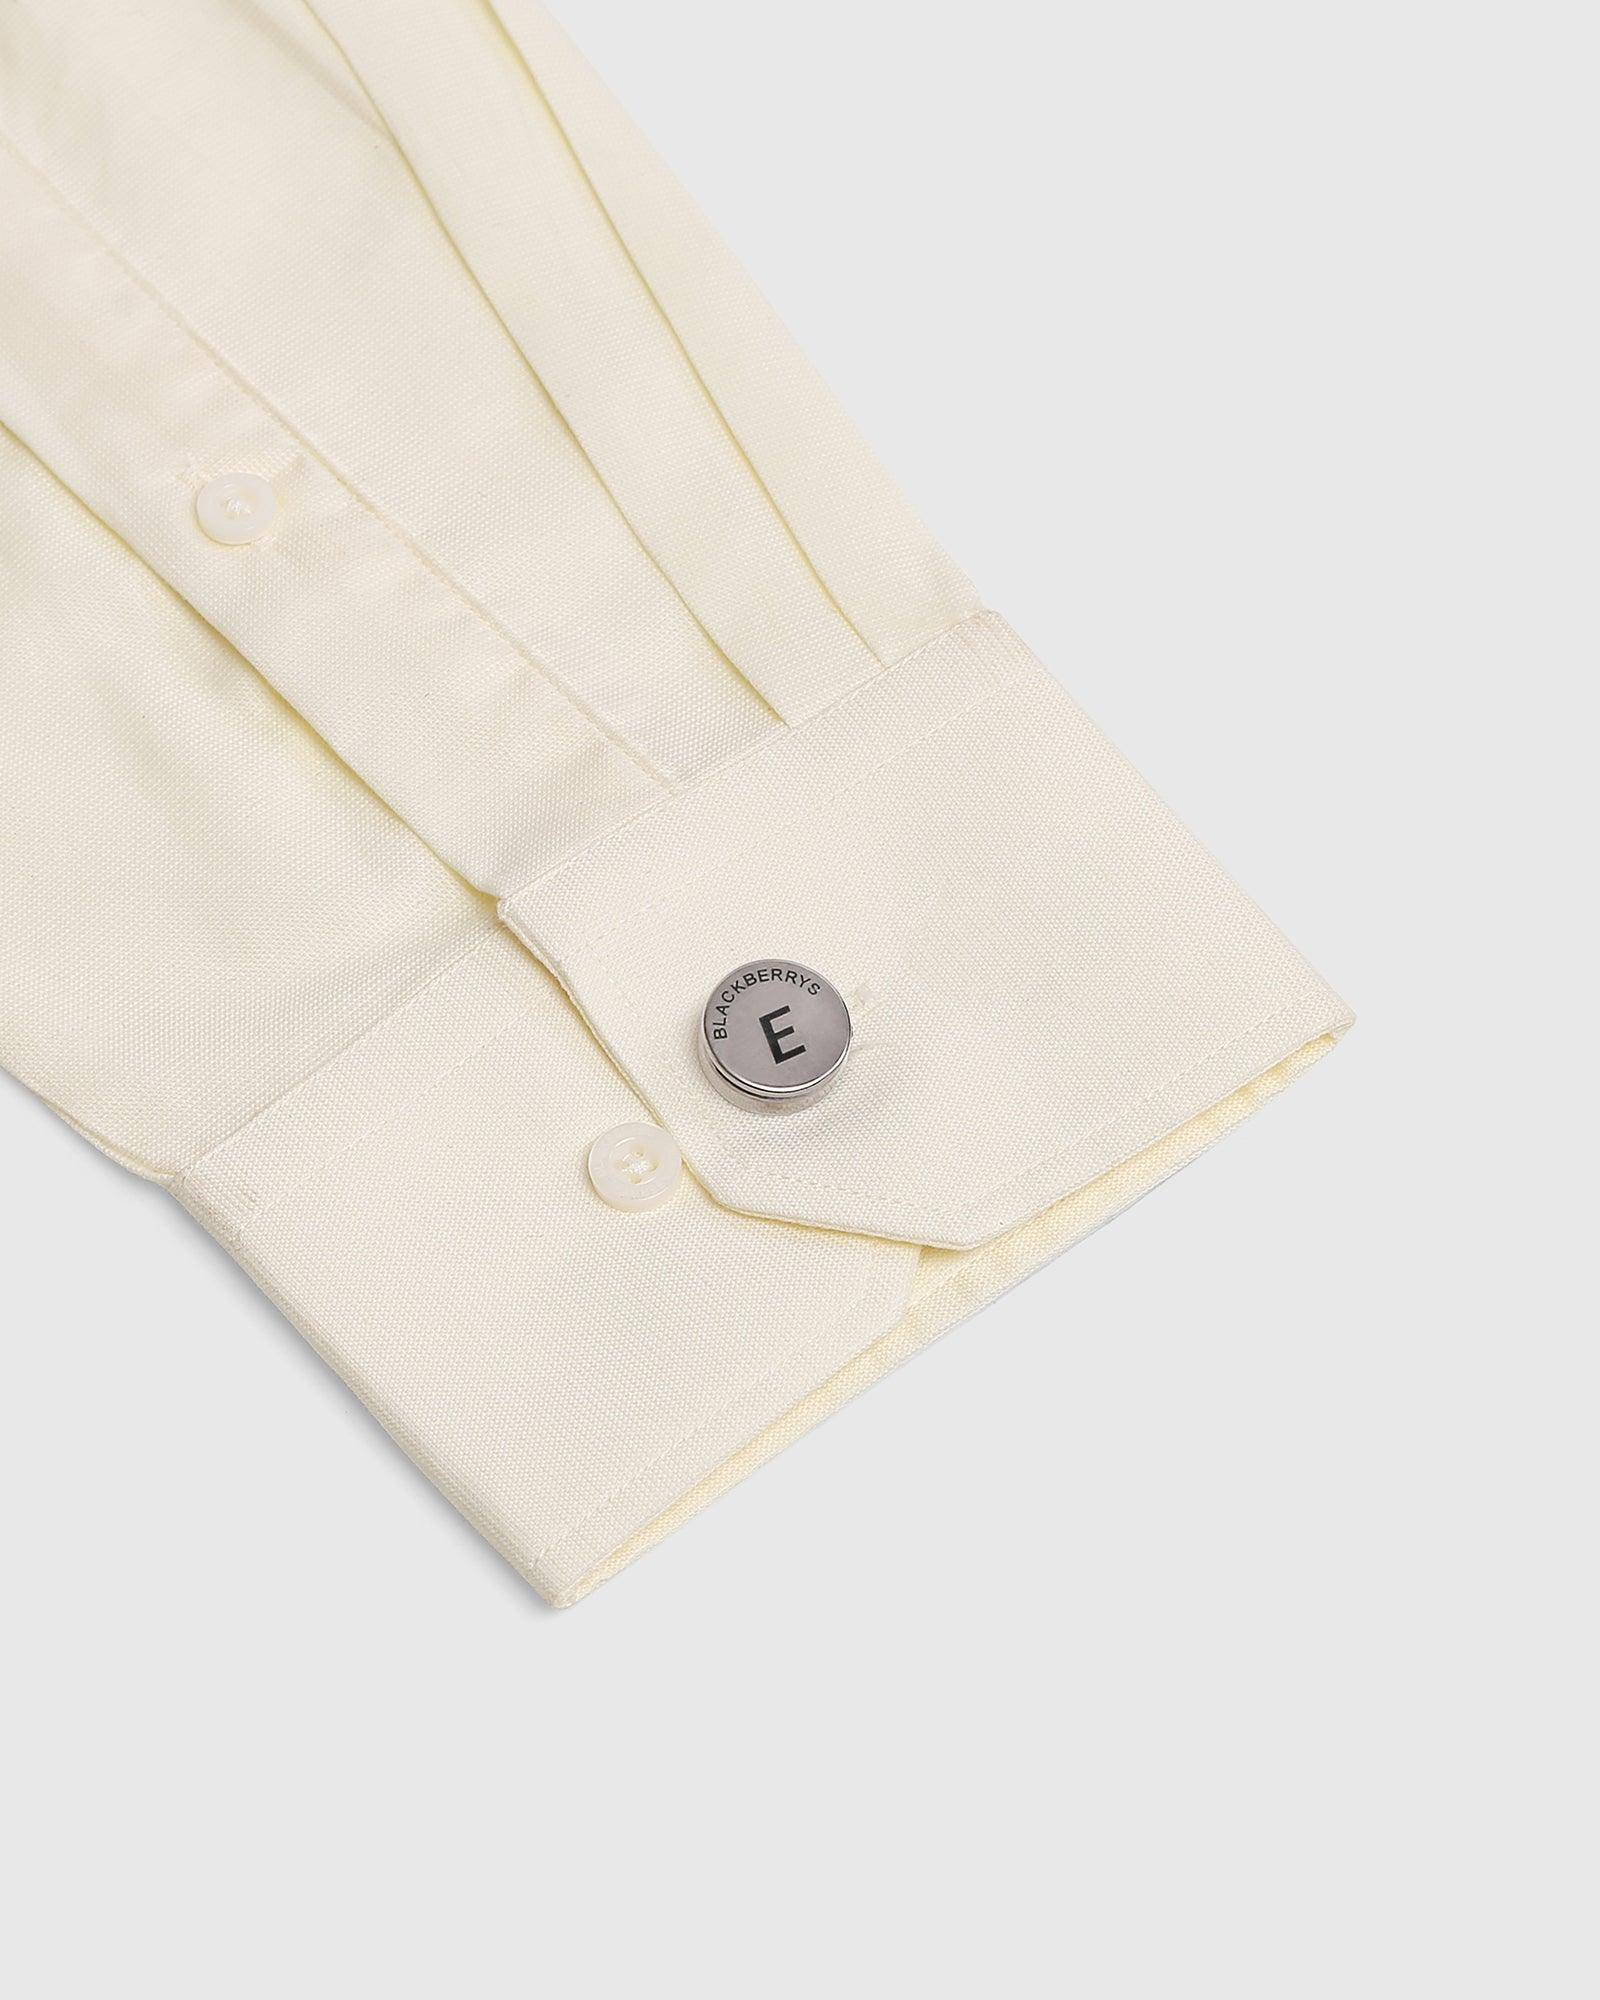 Personalised Shirt Button Cover With Alphabetic Initial-E